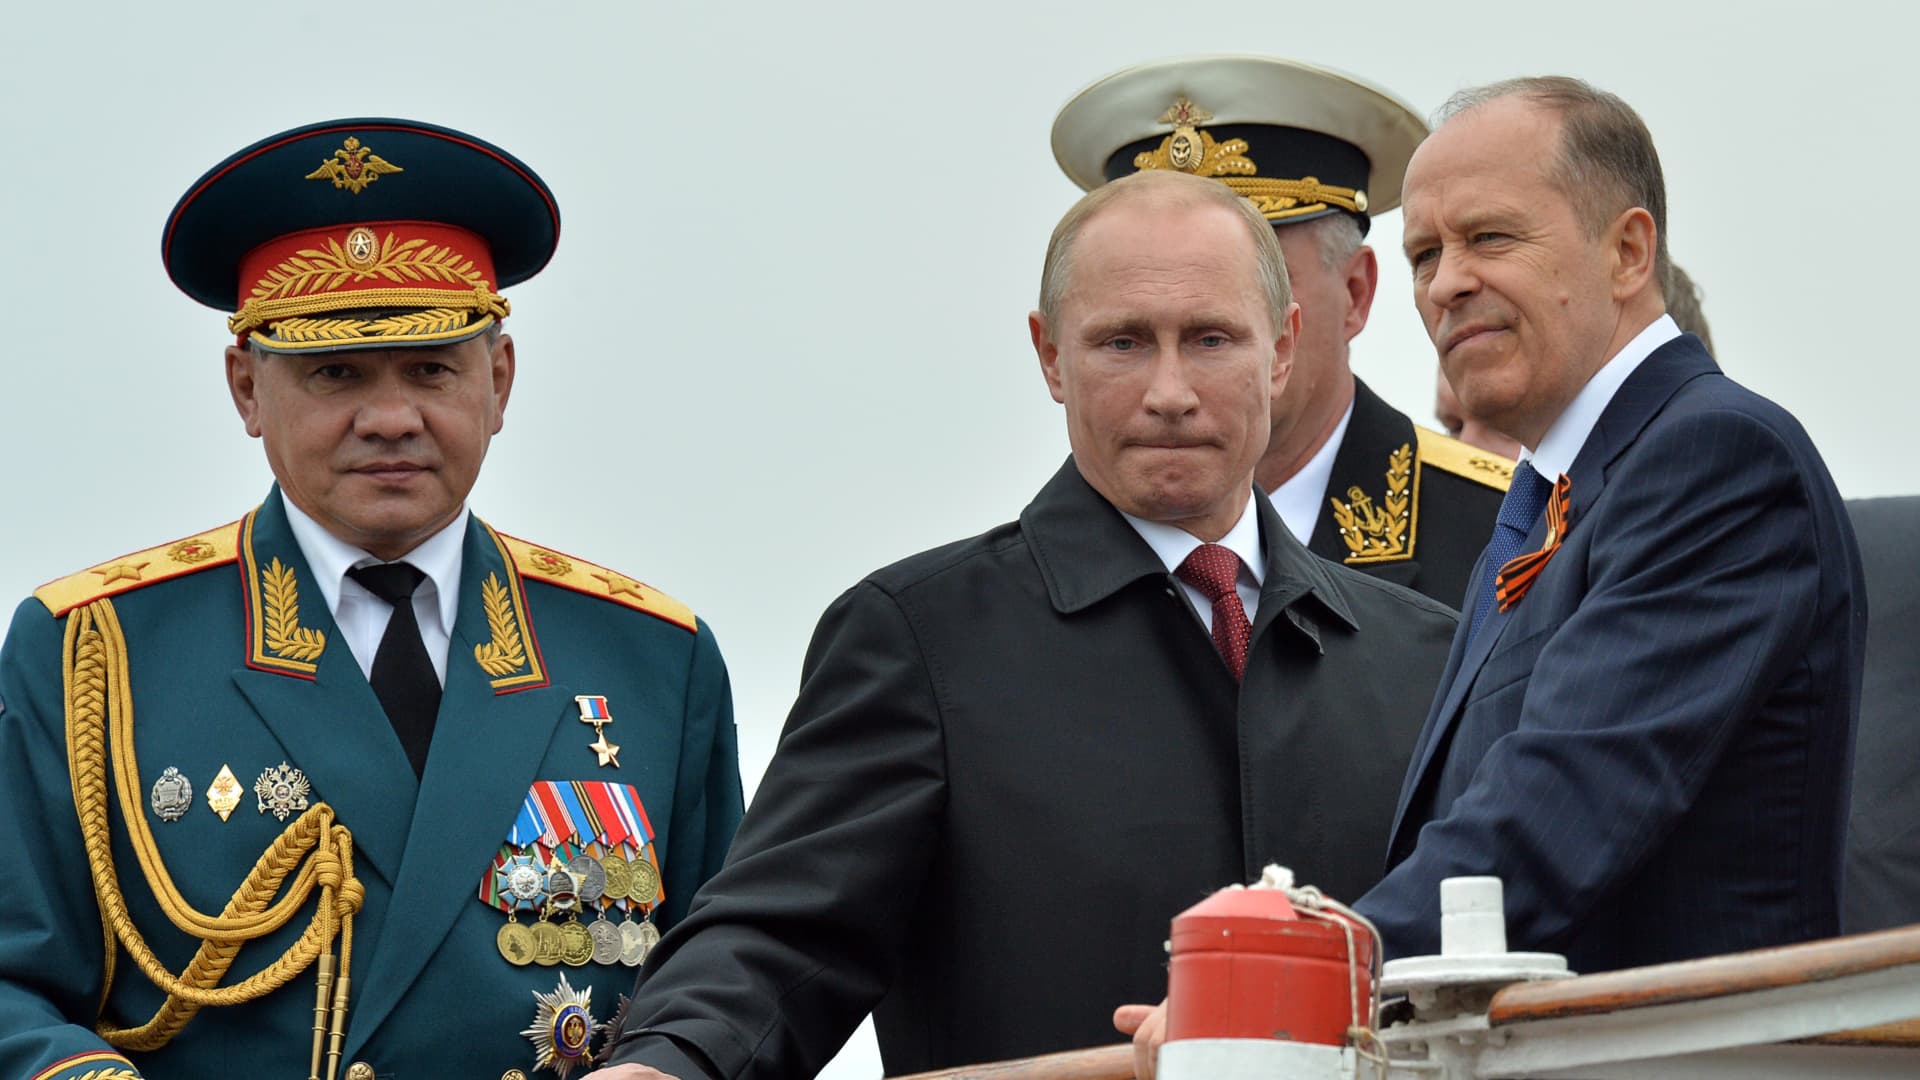 Russian President Vladimir Putin (C) reviews Russian naval ships in the Crimean port of Sevastopol on May 9, 2014, with head of the Federal Security Service (FSB) Alexander Bortnikov (R) and Defence Minister Sergei Shoigu (L) attending. 